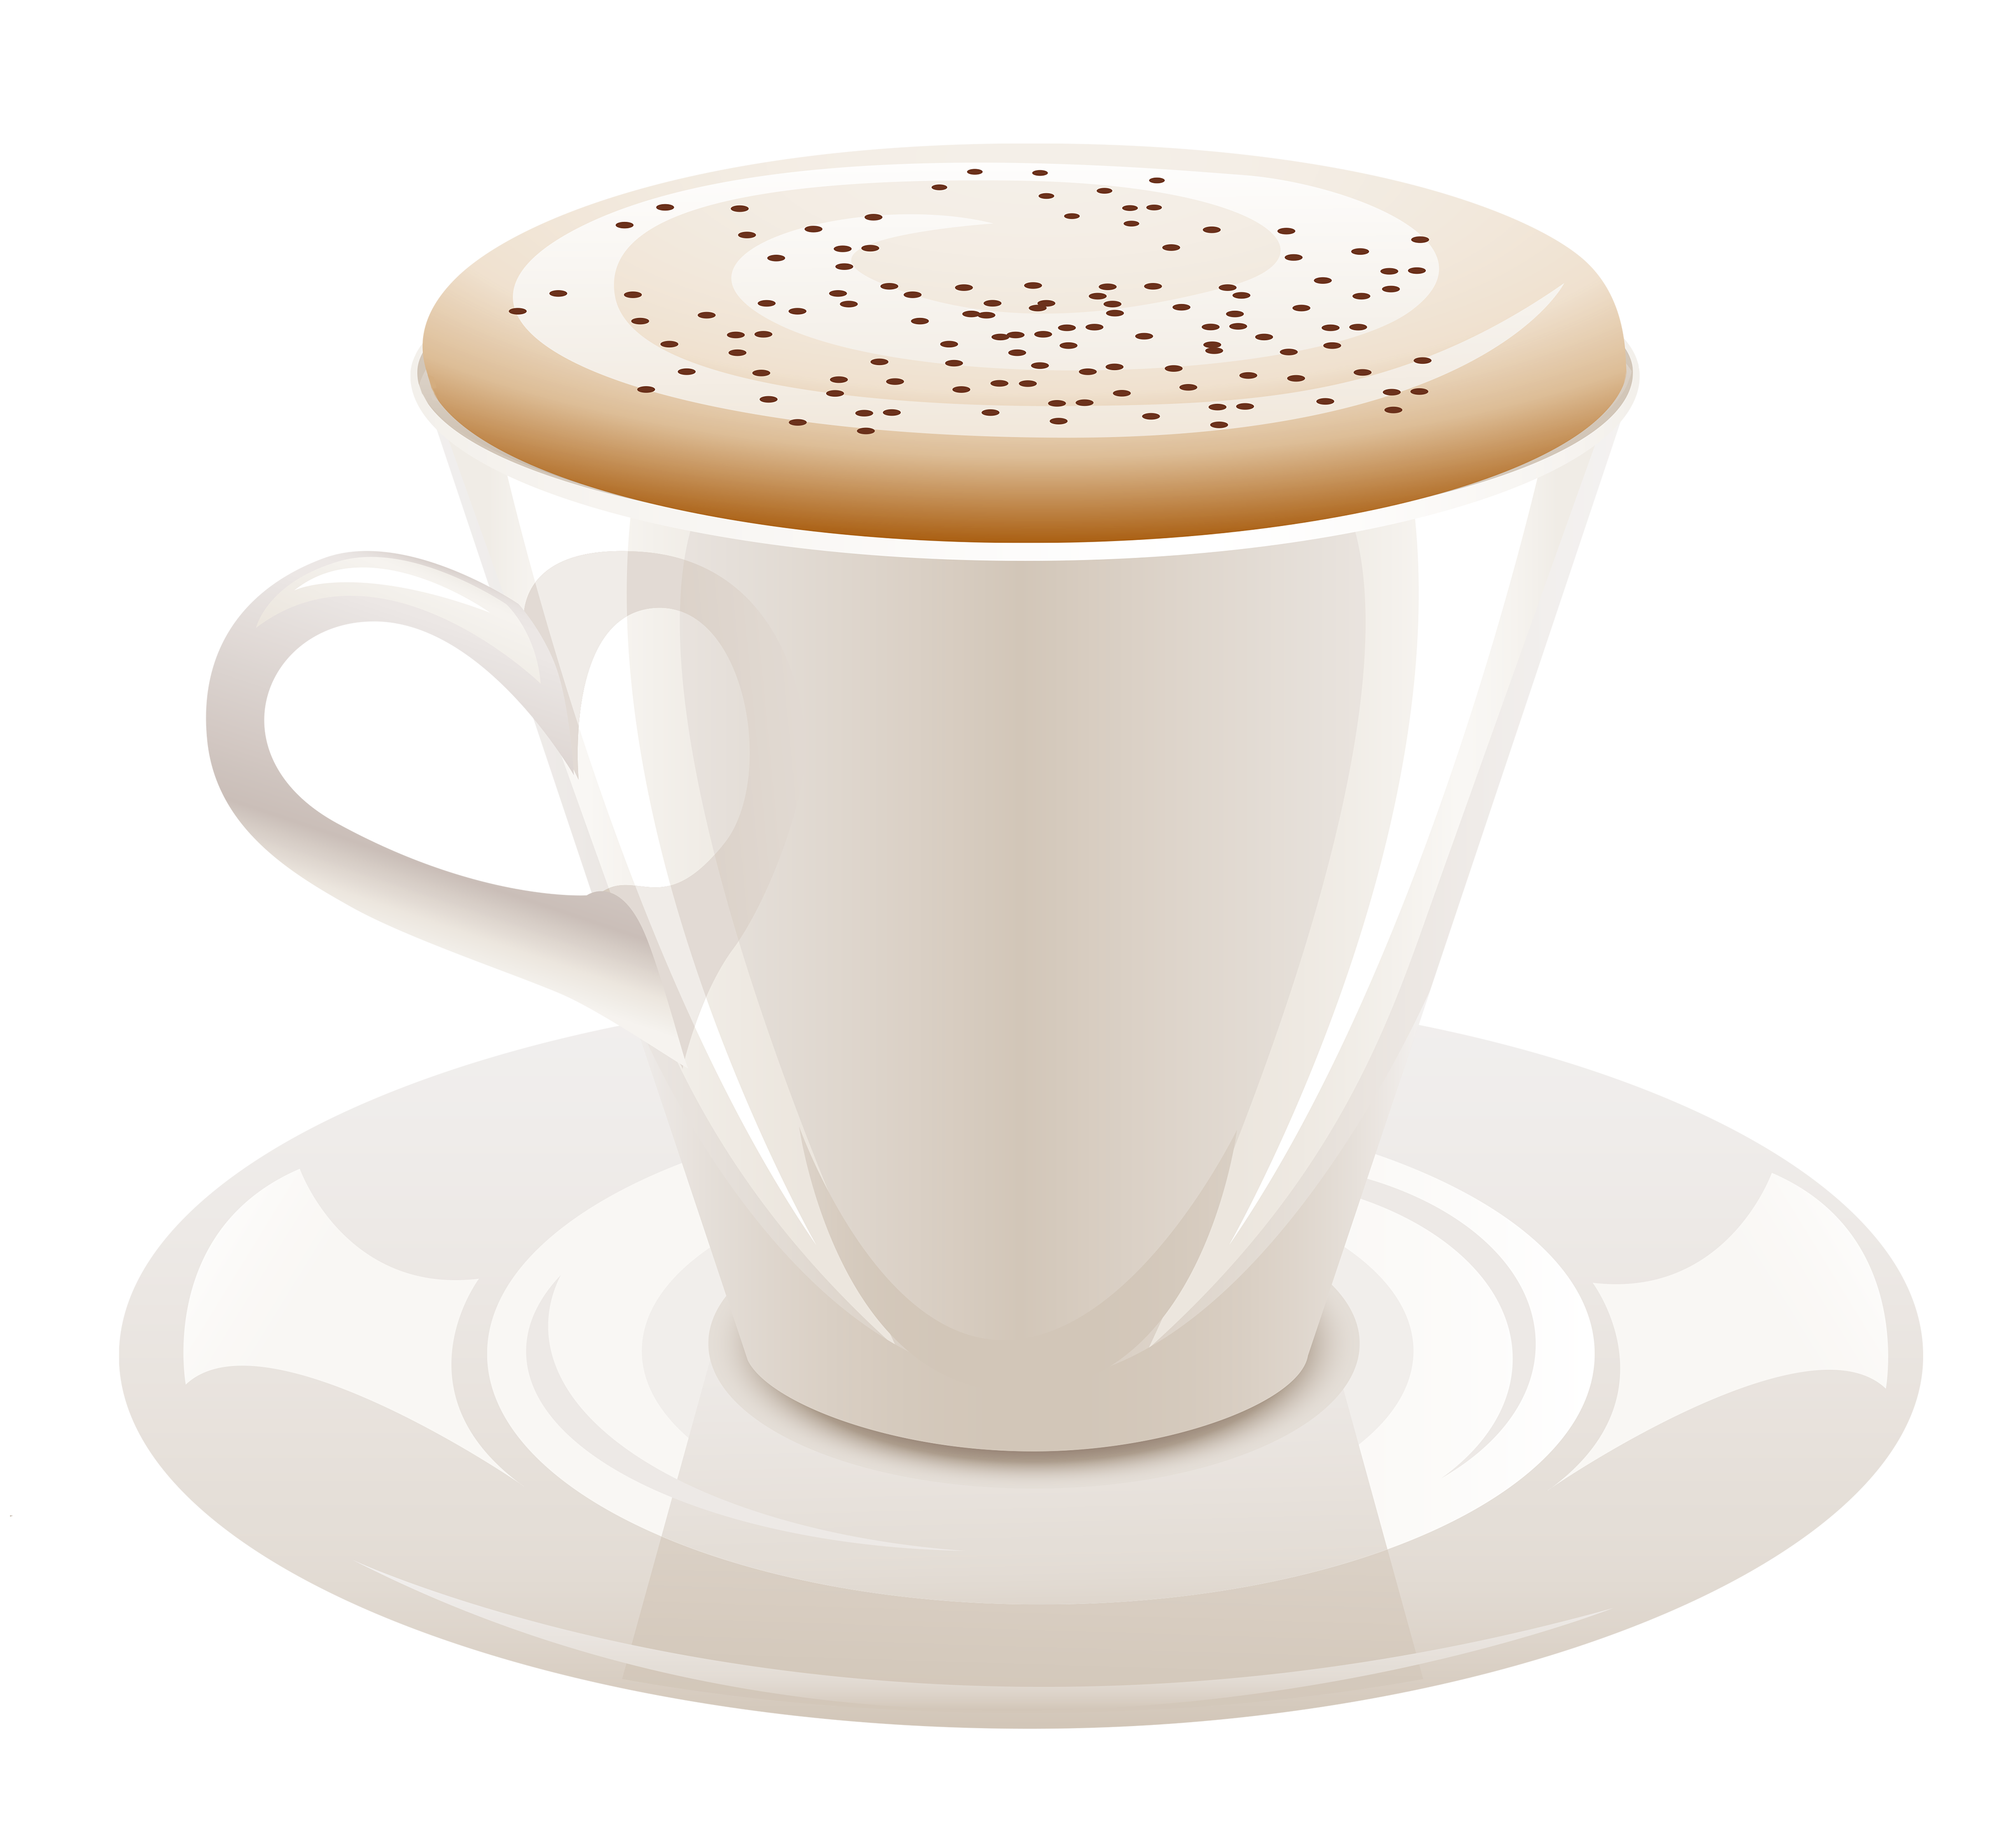 https://gallery.yopriceville.com/var/albums/Free-Clipart-Pictures/Coffee-PNG/Transparent_Coffee_Cup_PNG_Picture.png?m=1434276734